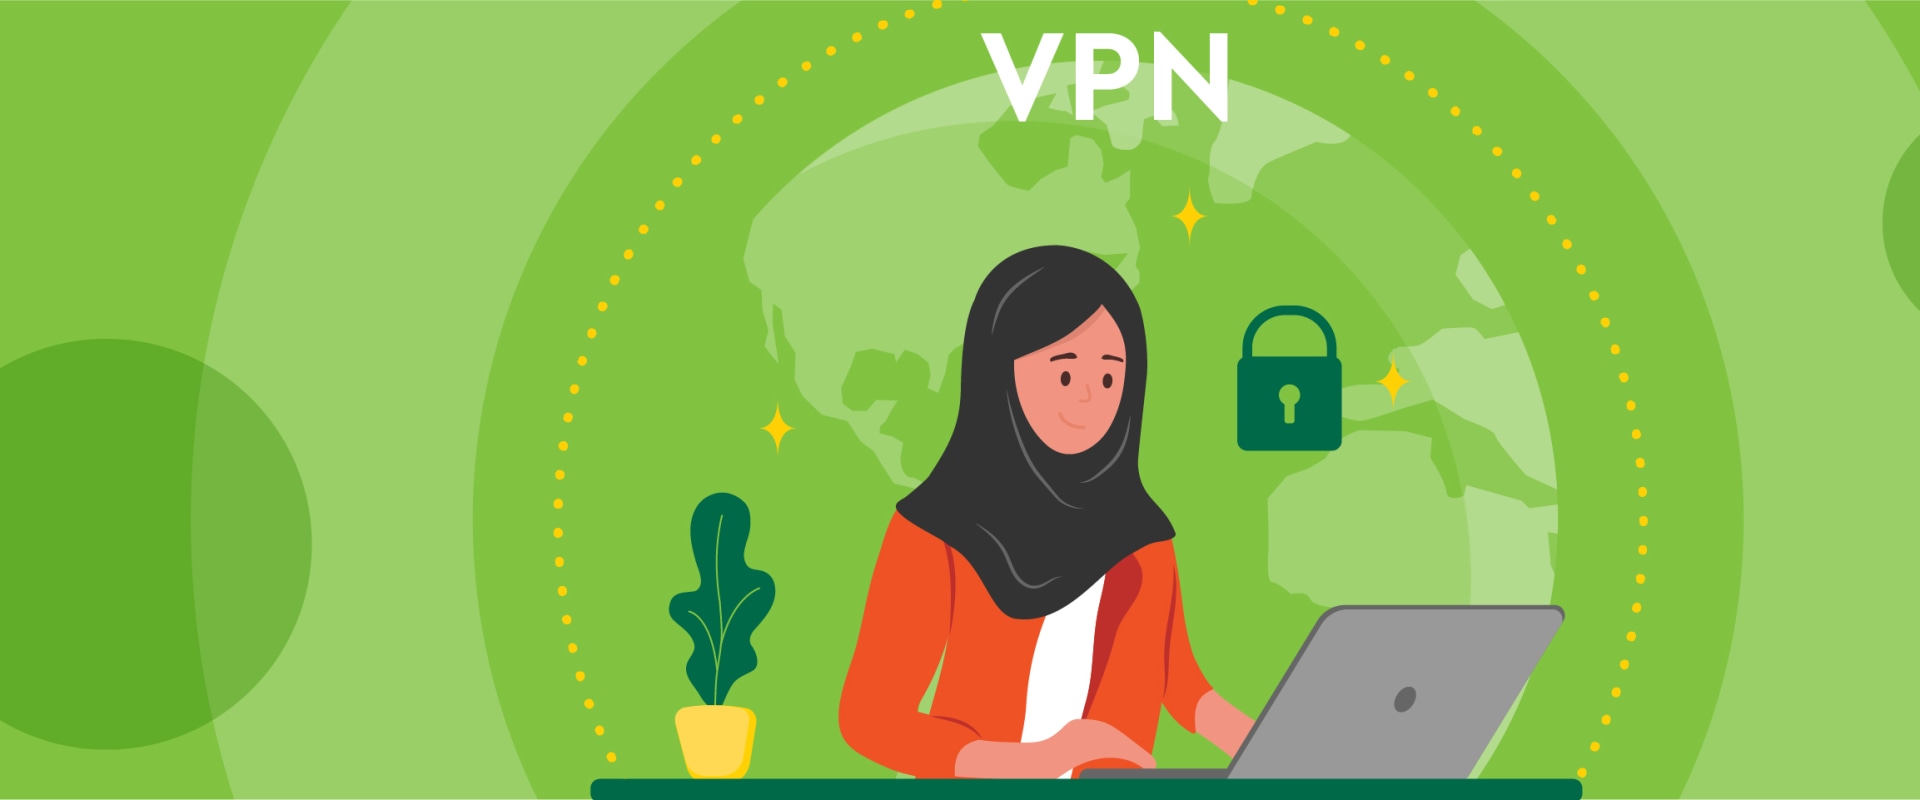 Tips for Preventing Identity Theft with a VPN